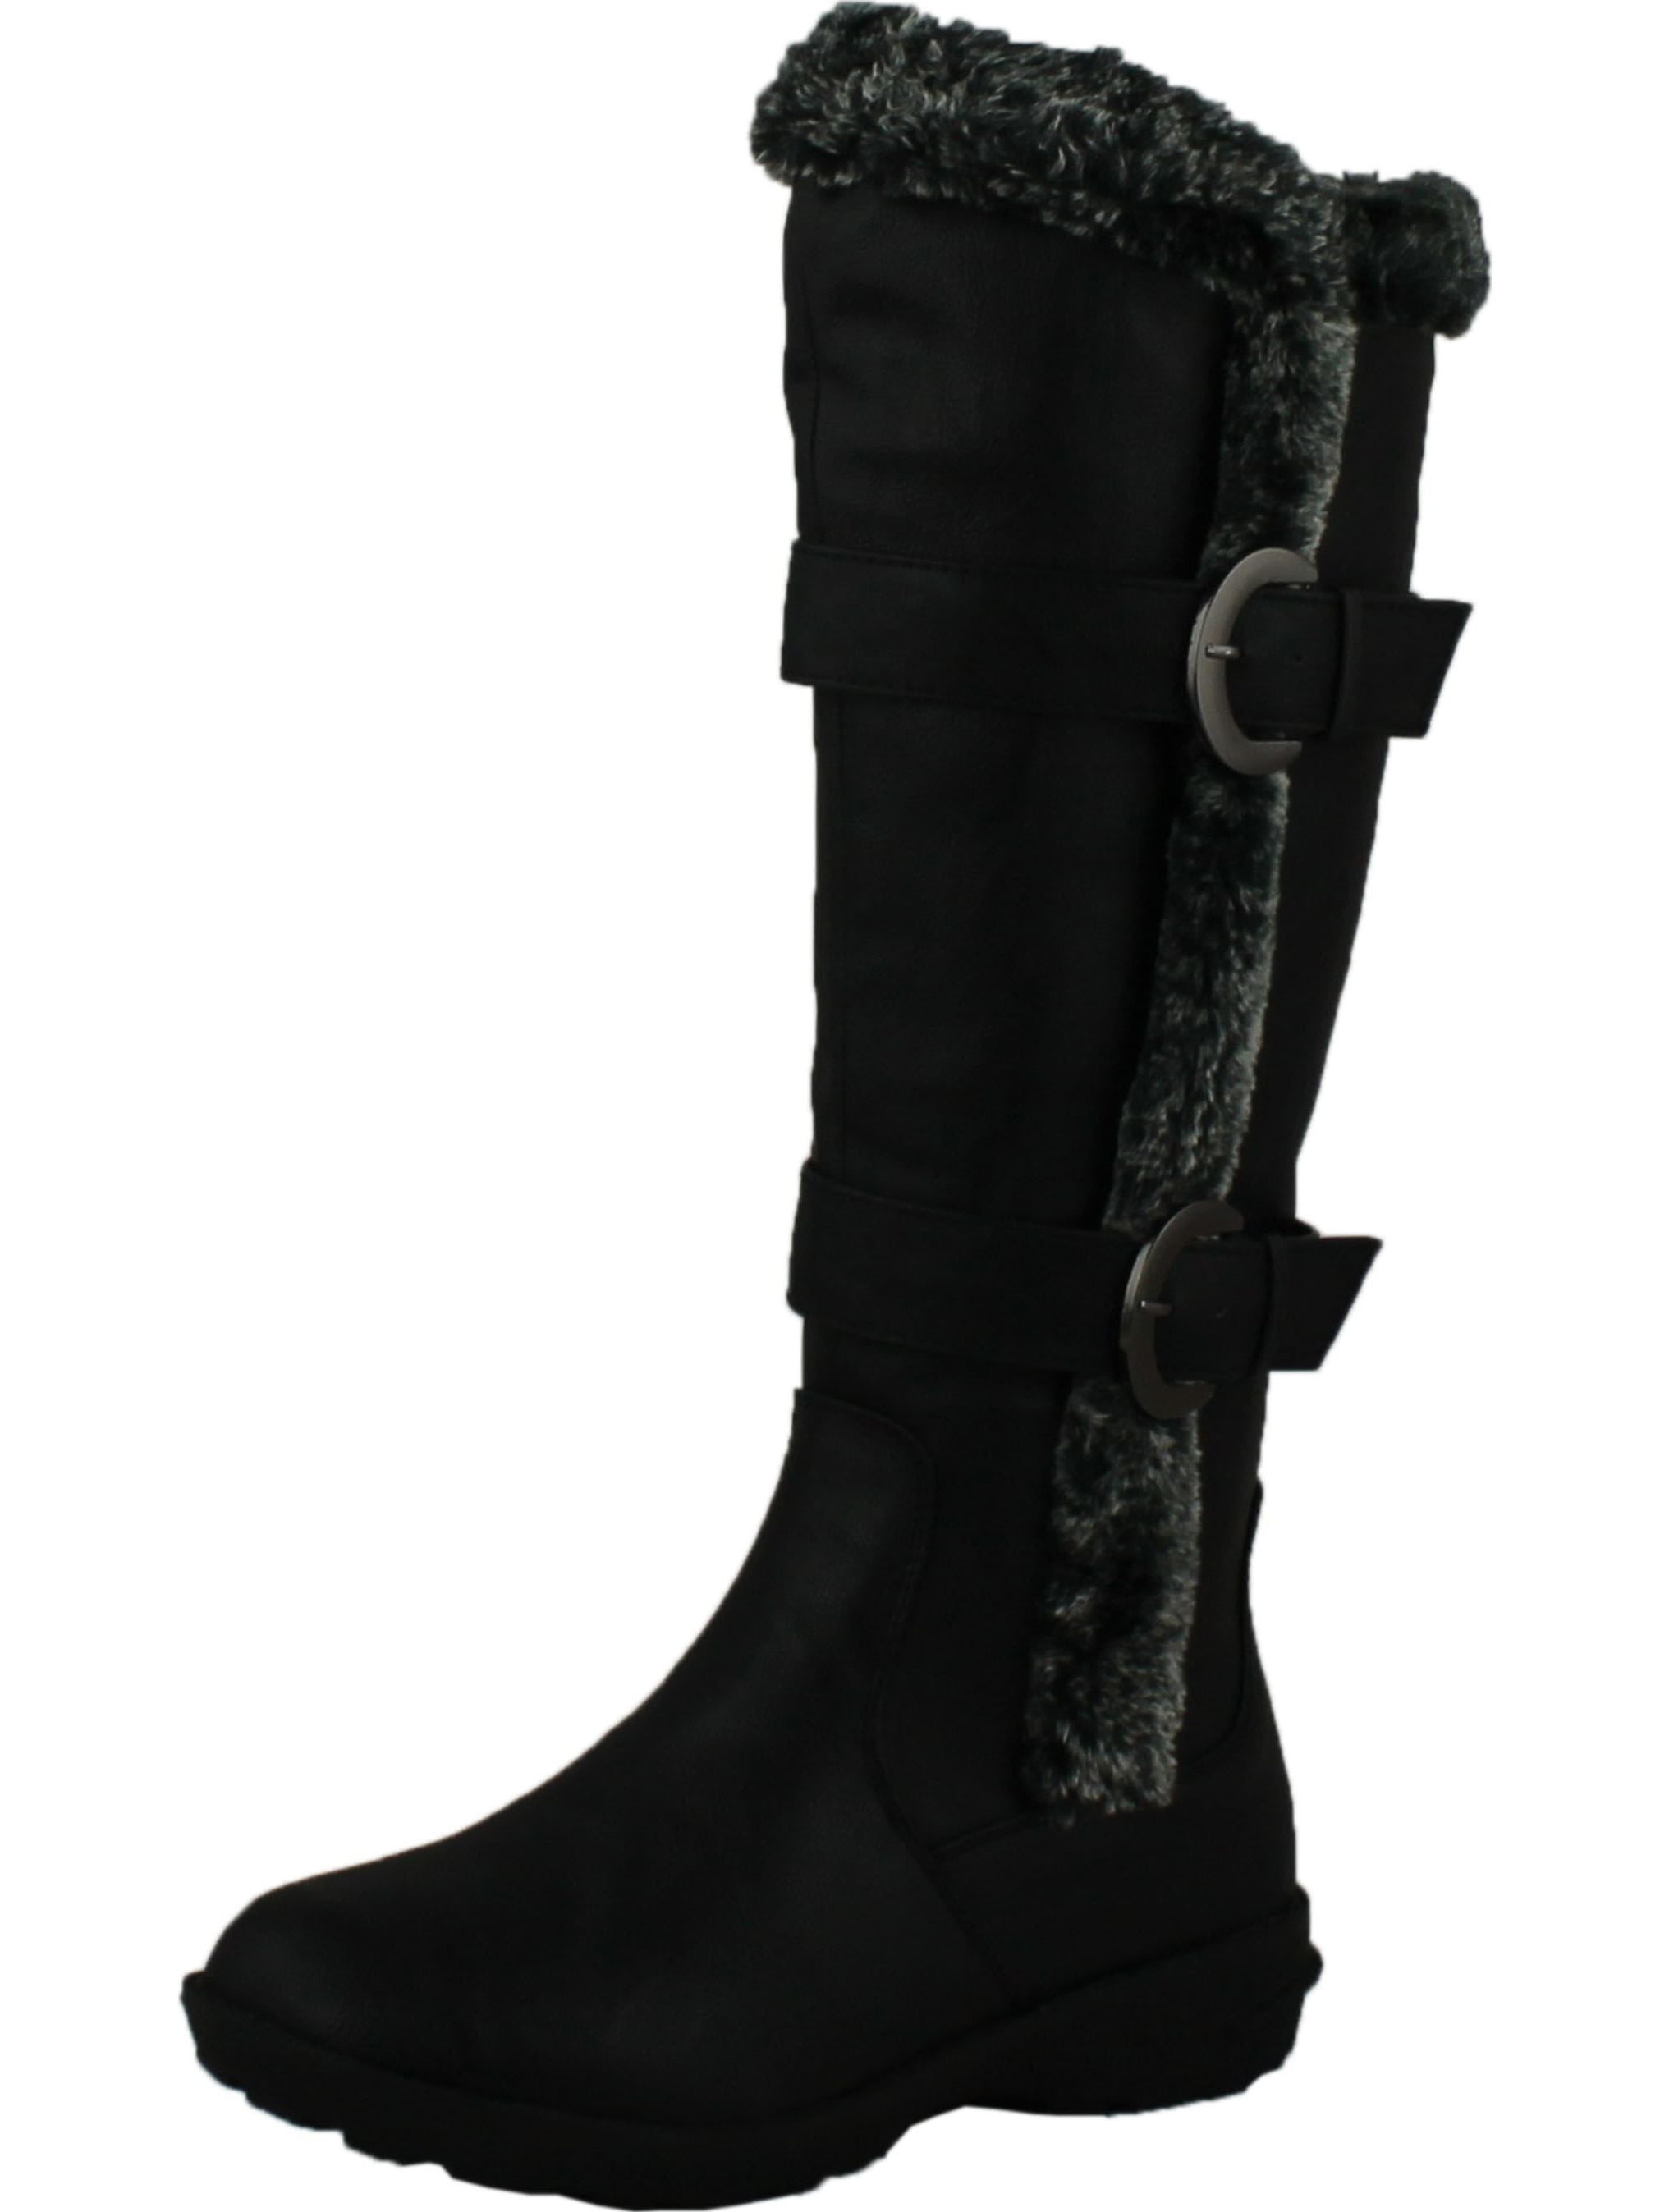 warm winter riding boots